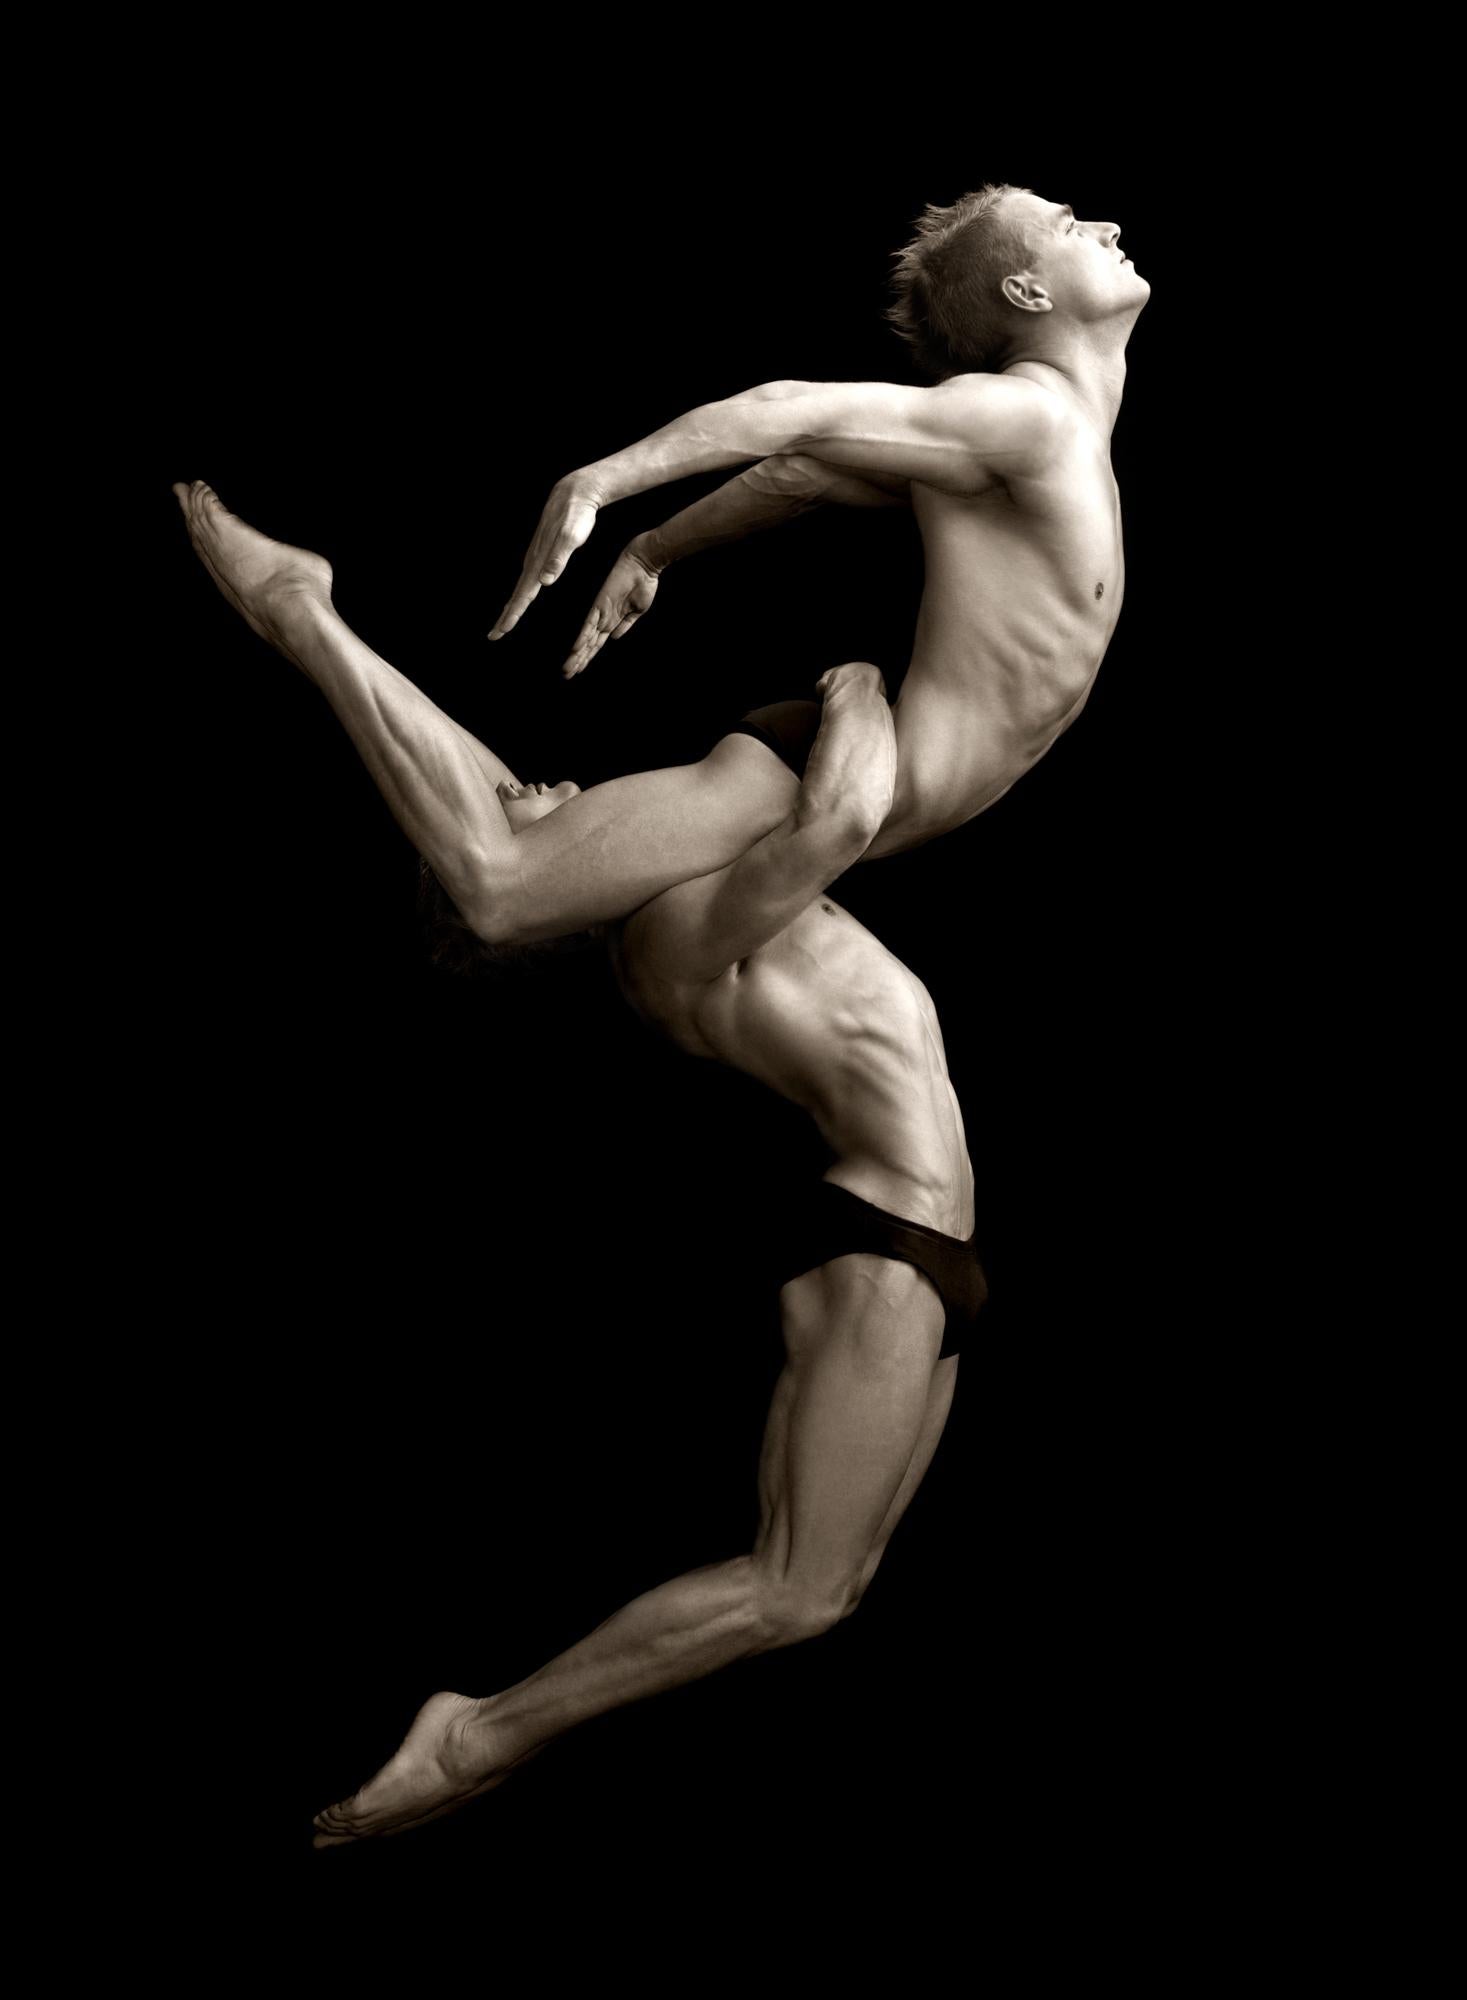 Greg Gorman Black and White Photograph - Atherton Twins, Contemporary, Nude, Photography